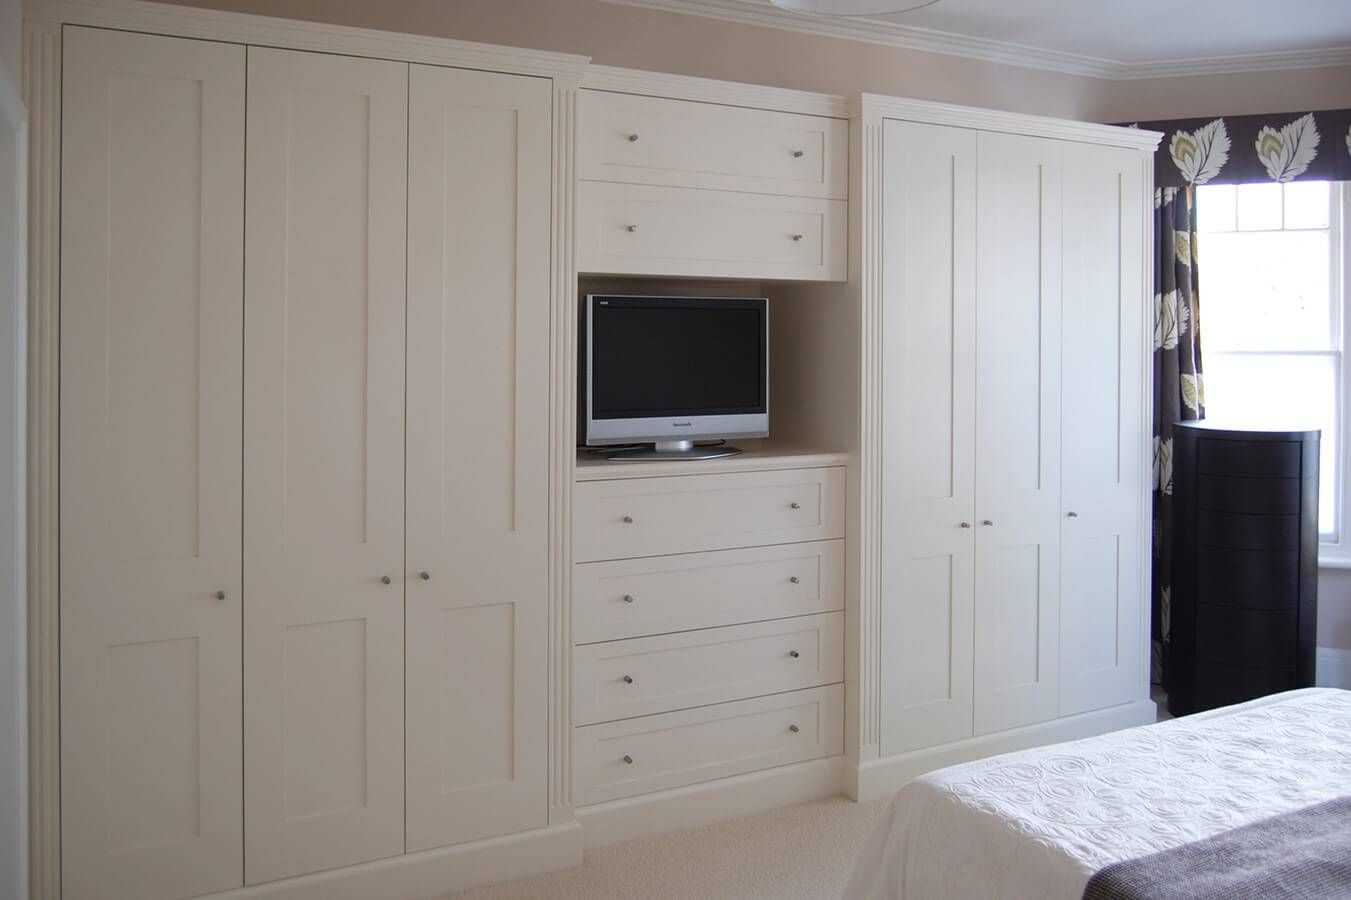 Fitted Bedrooms | Wardrobes, Beds And Chests Of Drawers Intended For Wardrobes And Chest Of Drawers Combined (View 7 of 15)